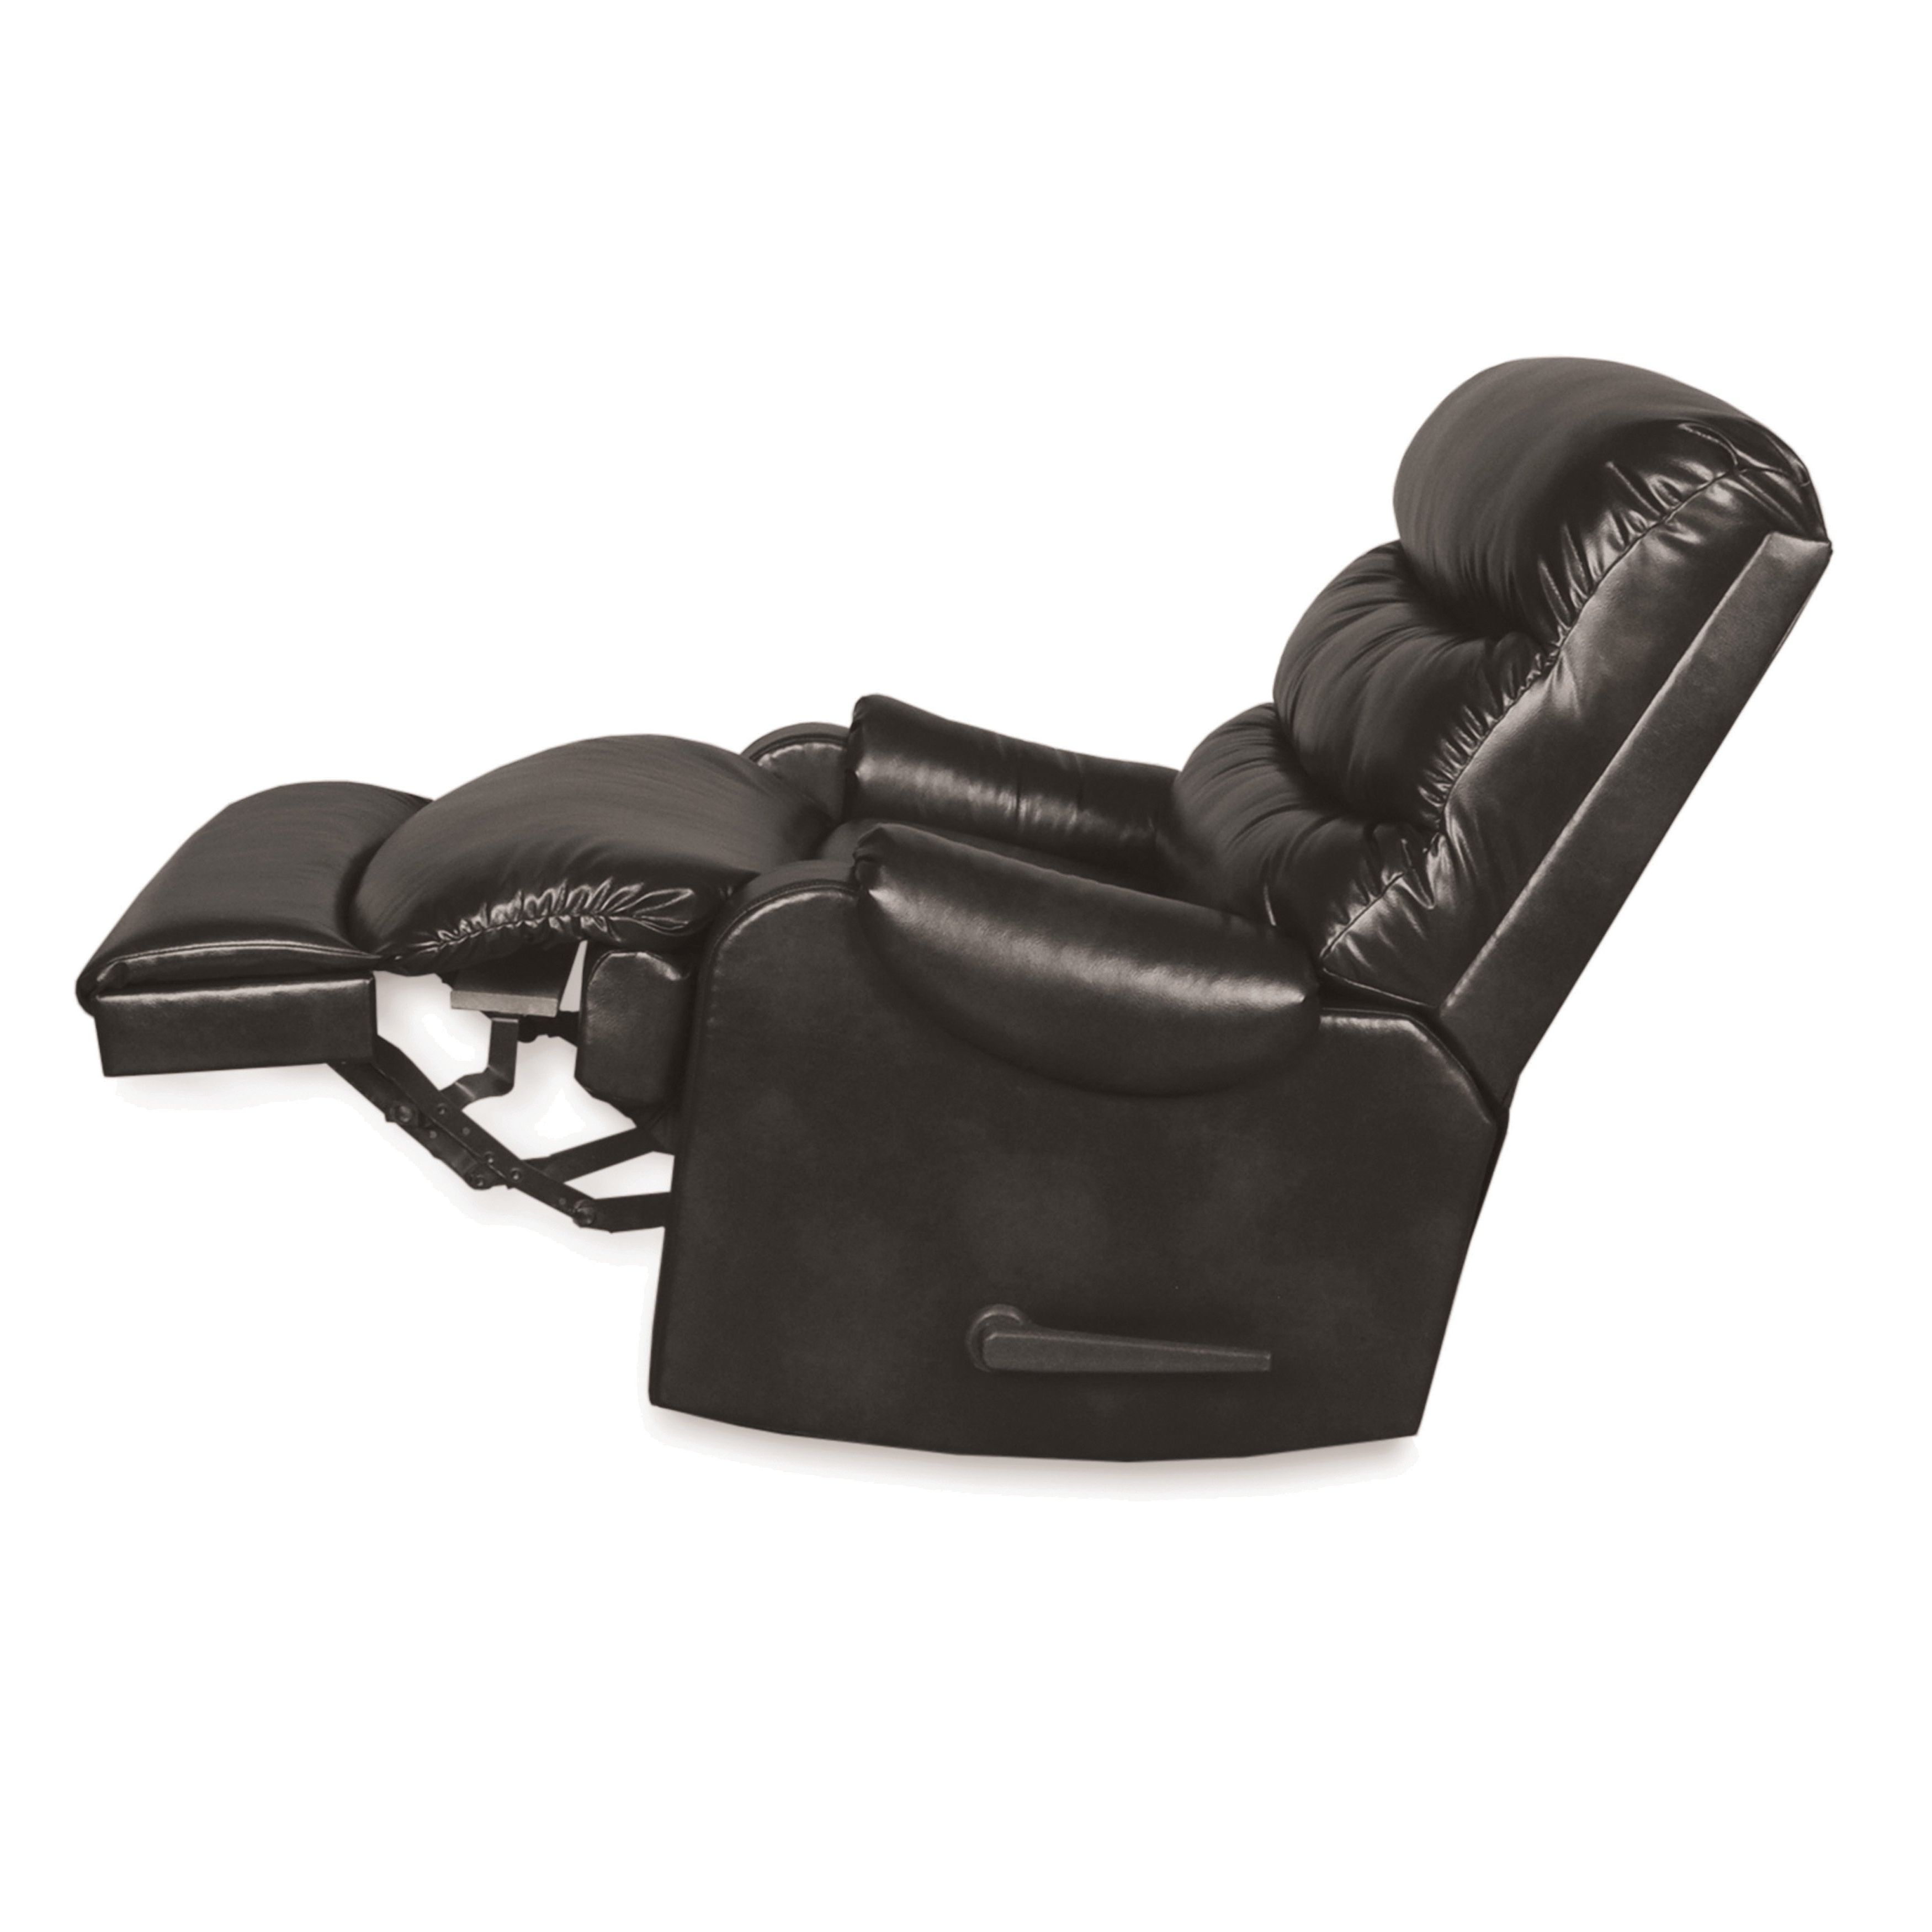 Well Known Shop Bailey Glider Recliner – Free Shipping Today – Overstock For Gannon Truffle Power Swivel Recliners (View 10 of 20)